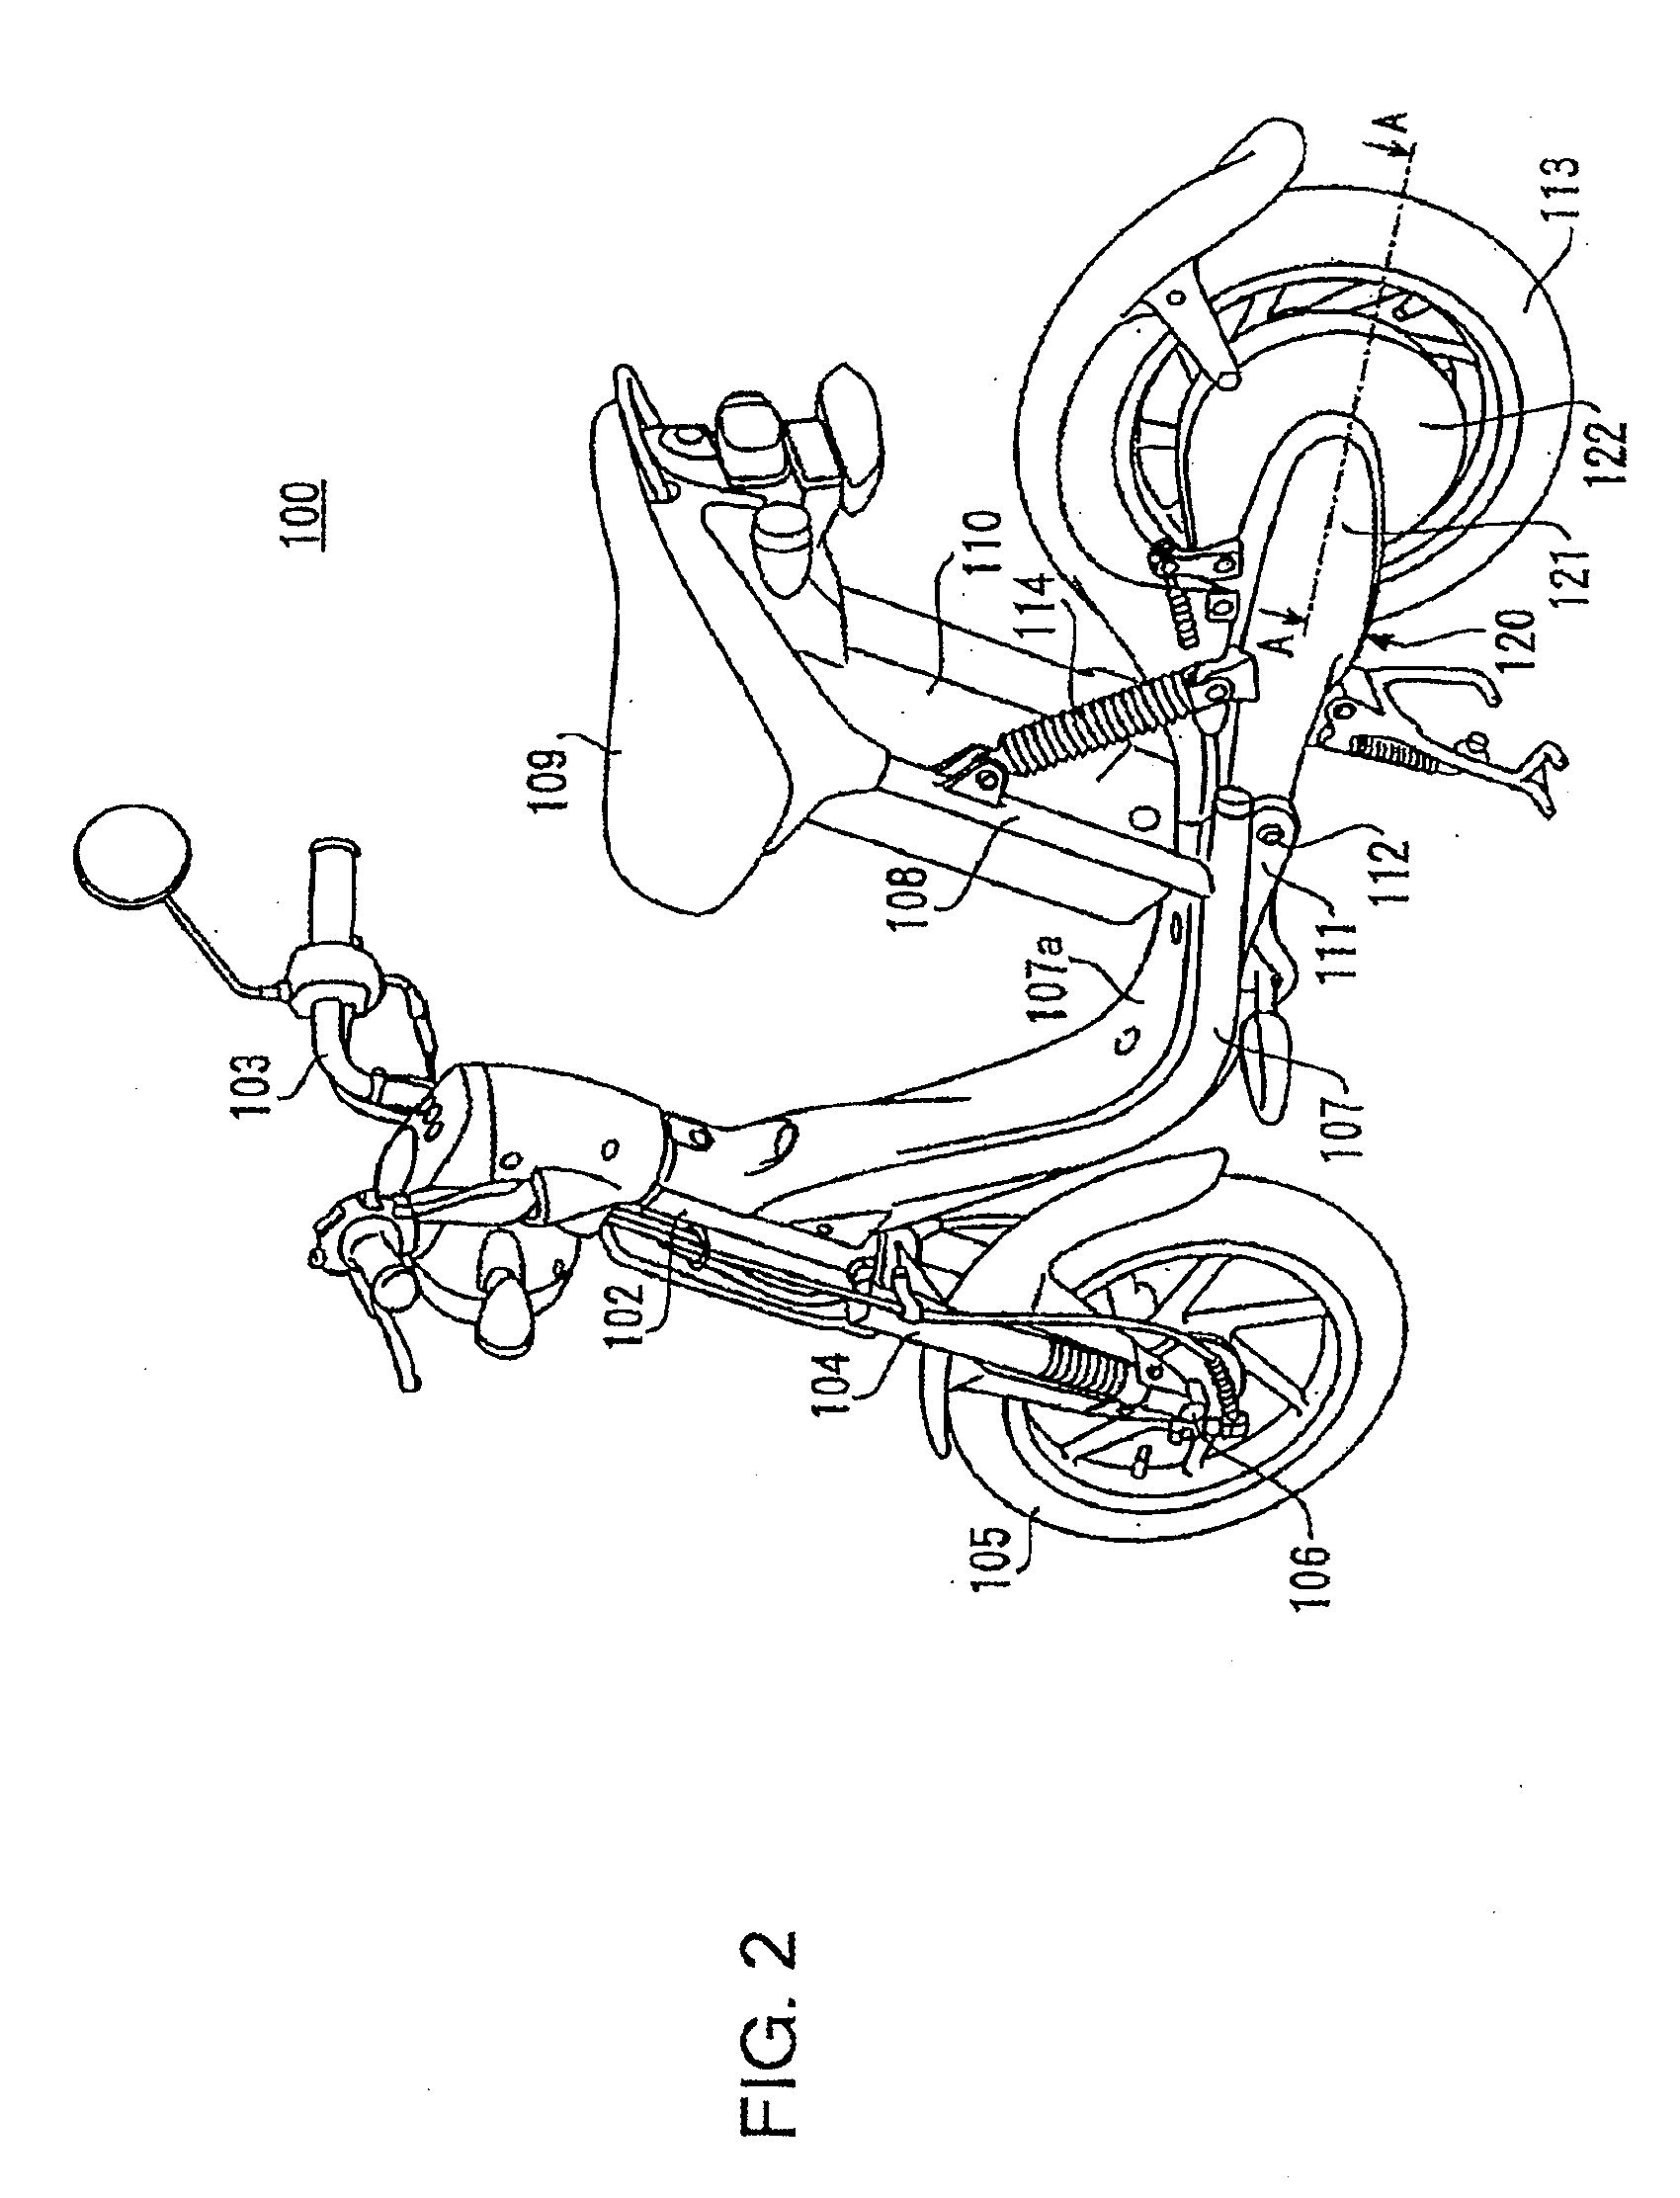 Rotating Electric Machine and Electrically Driven Vehicle